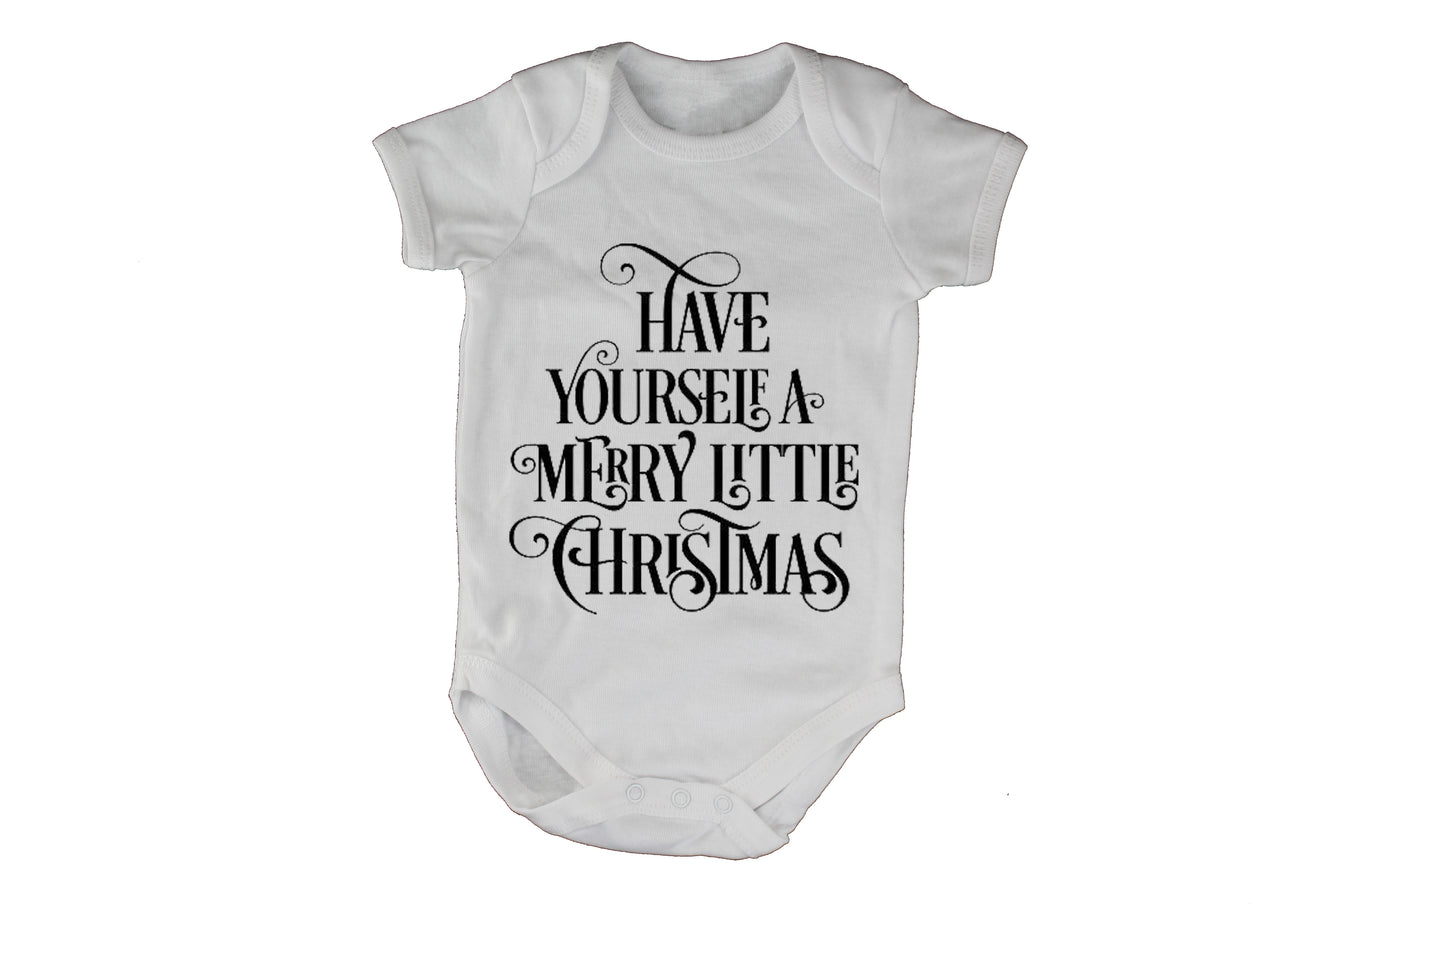 Have Yourself a Merry Little Christmas! - BuyAbility South Africa